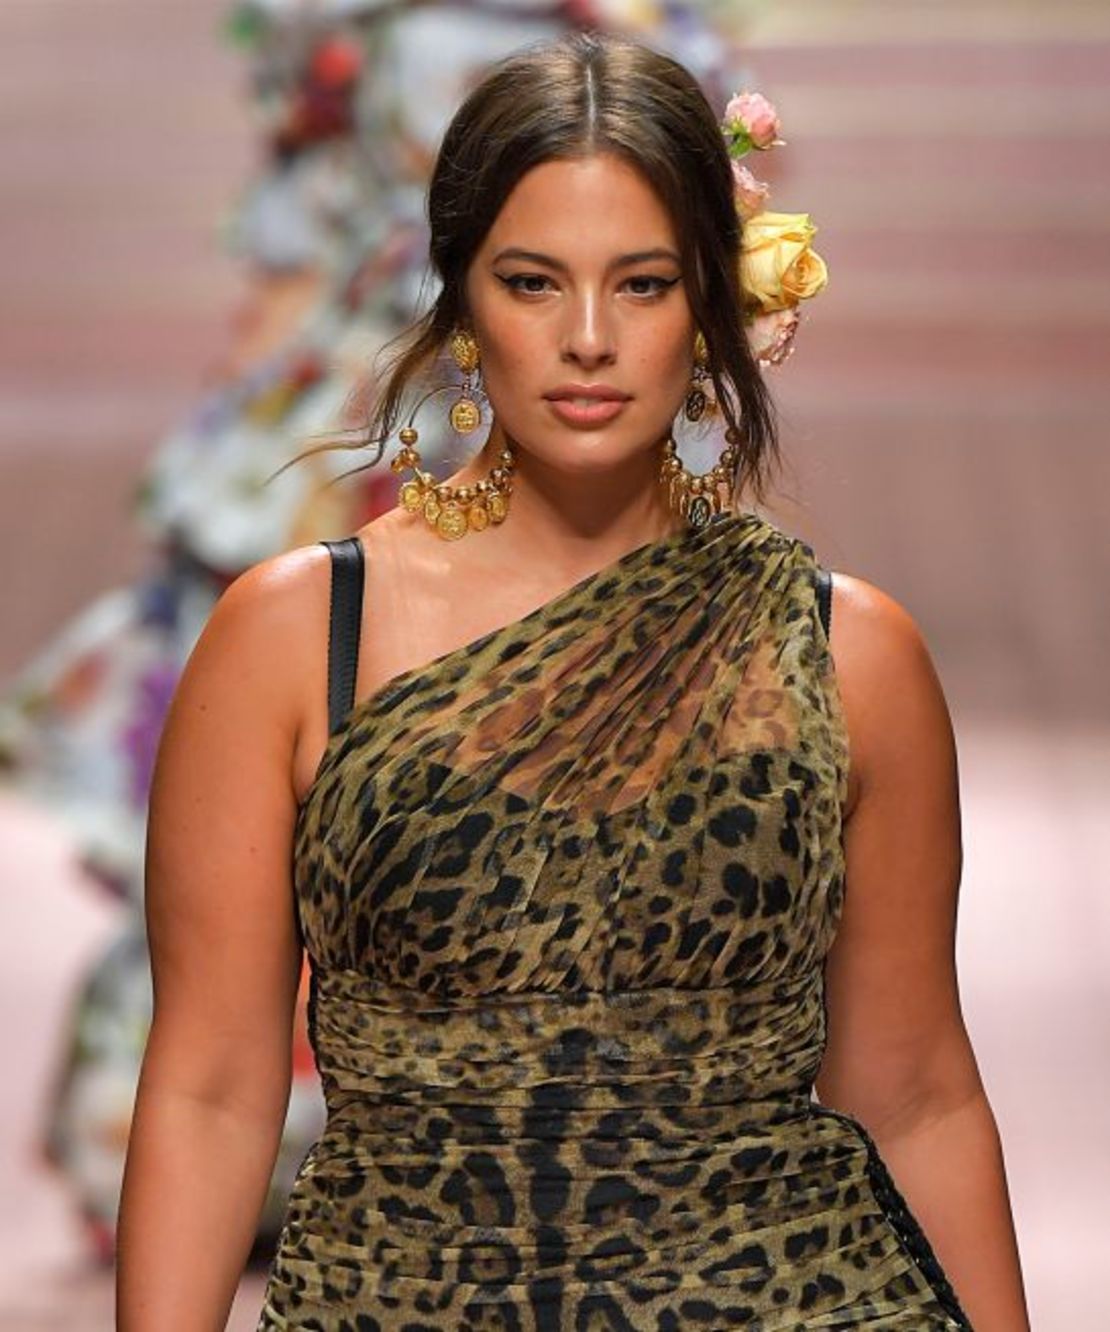 Seven plus-size models who paved the way for today's biggest names